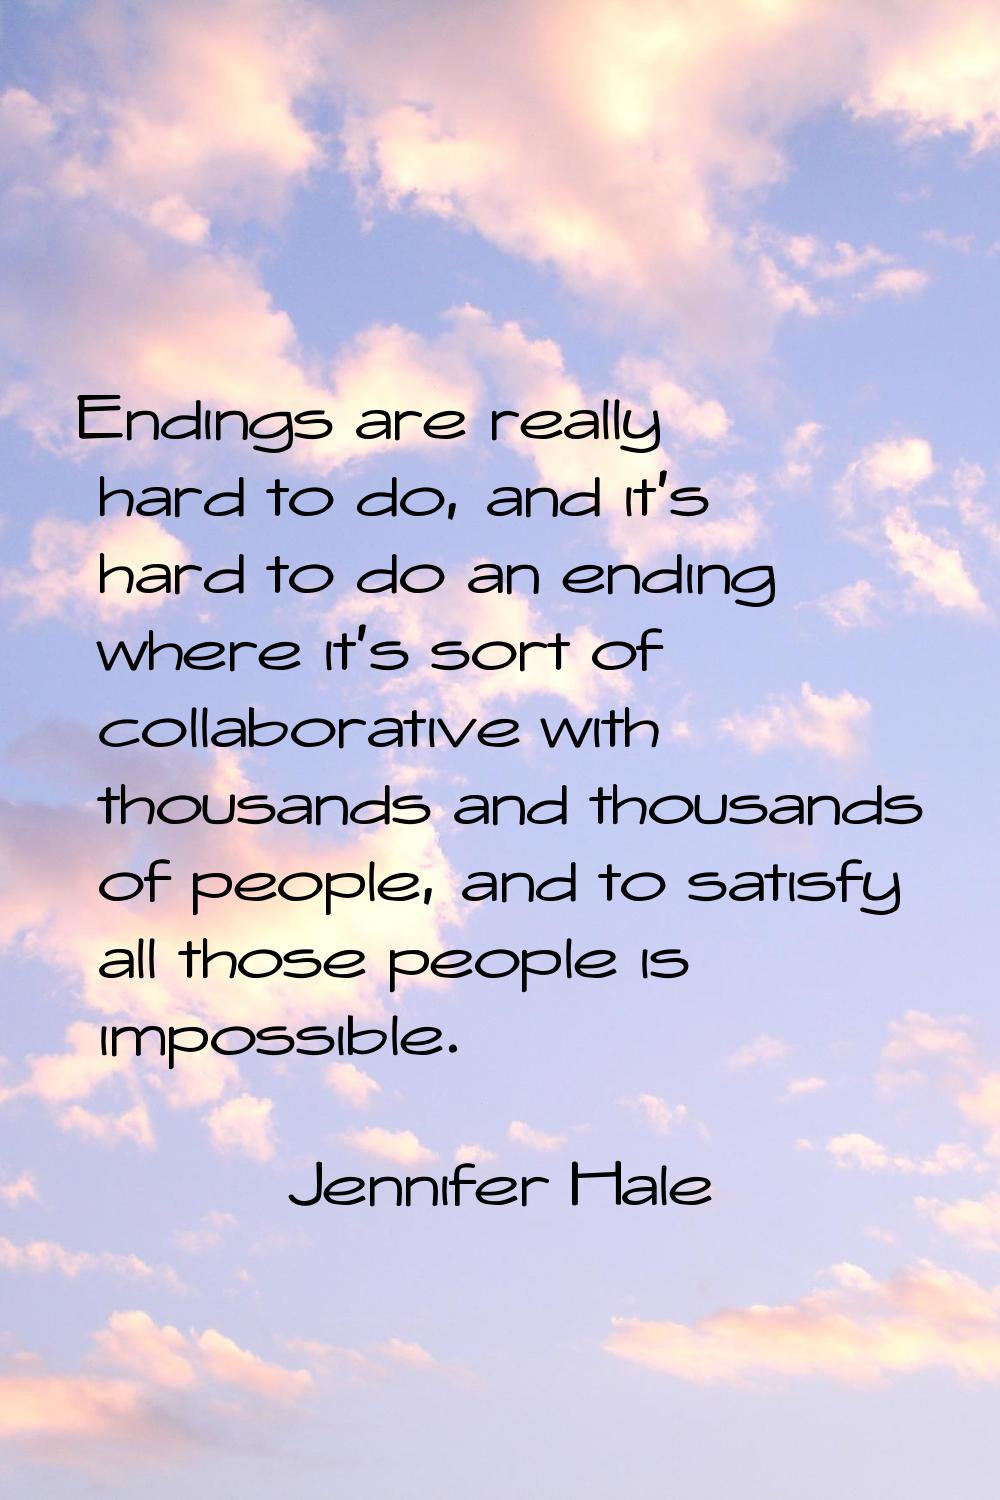 Endings are really hard to do, and it's hard to do an ending where it's sort of collaborative with 